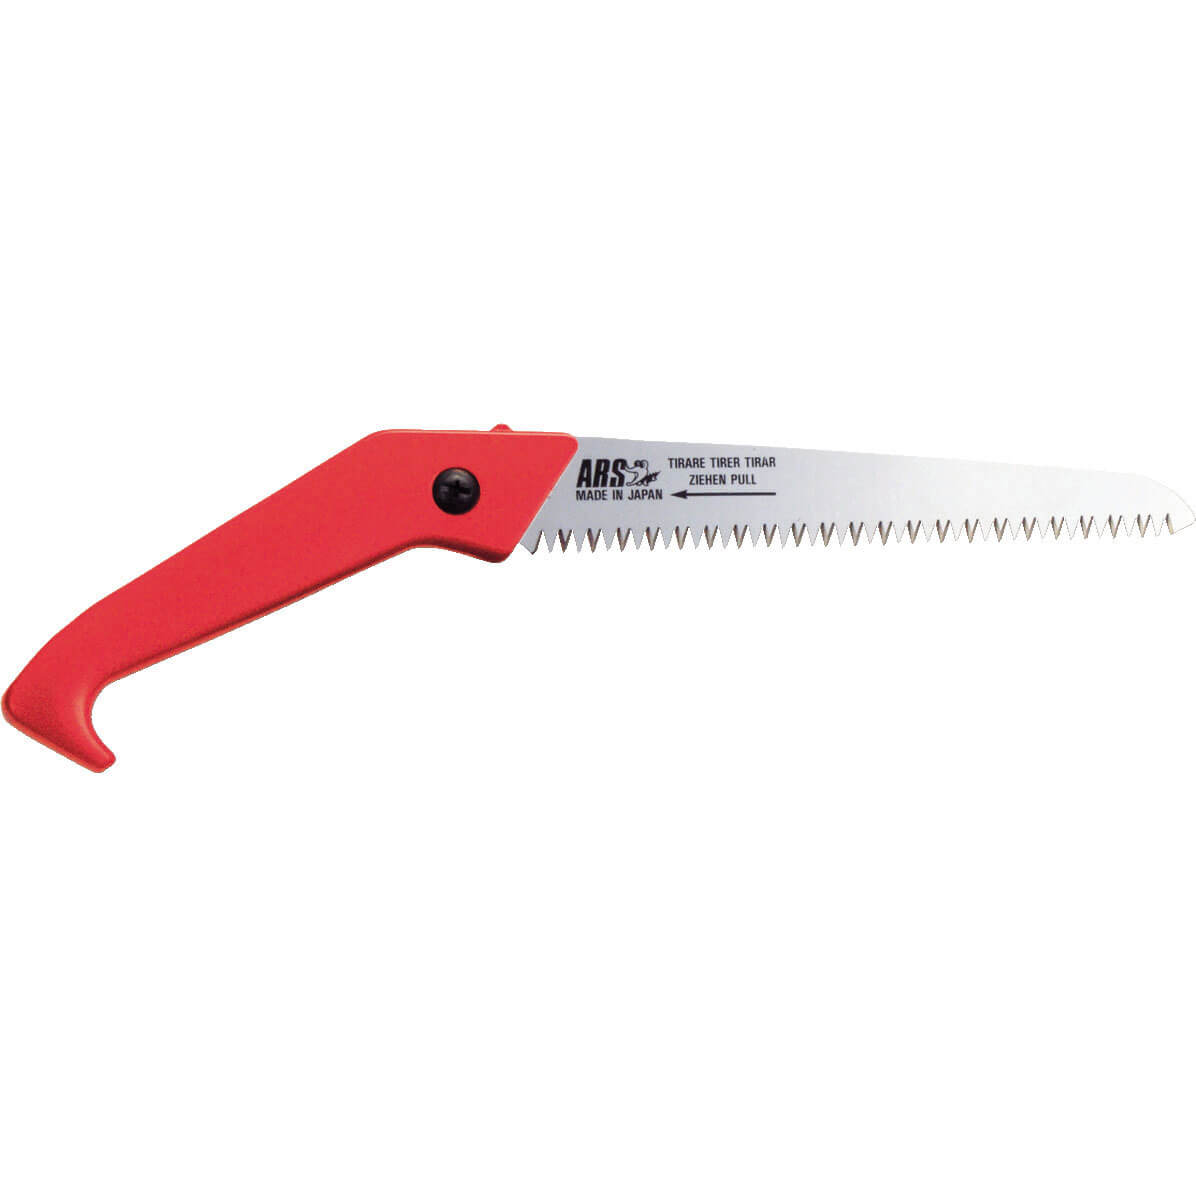 Image of ARS CAM Pruning Saw 336mm